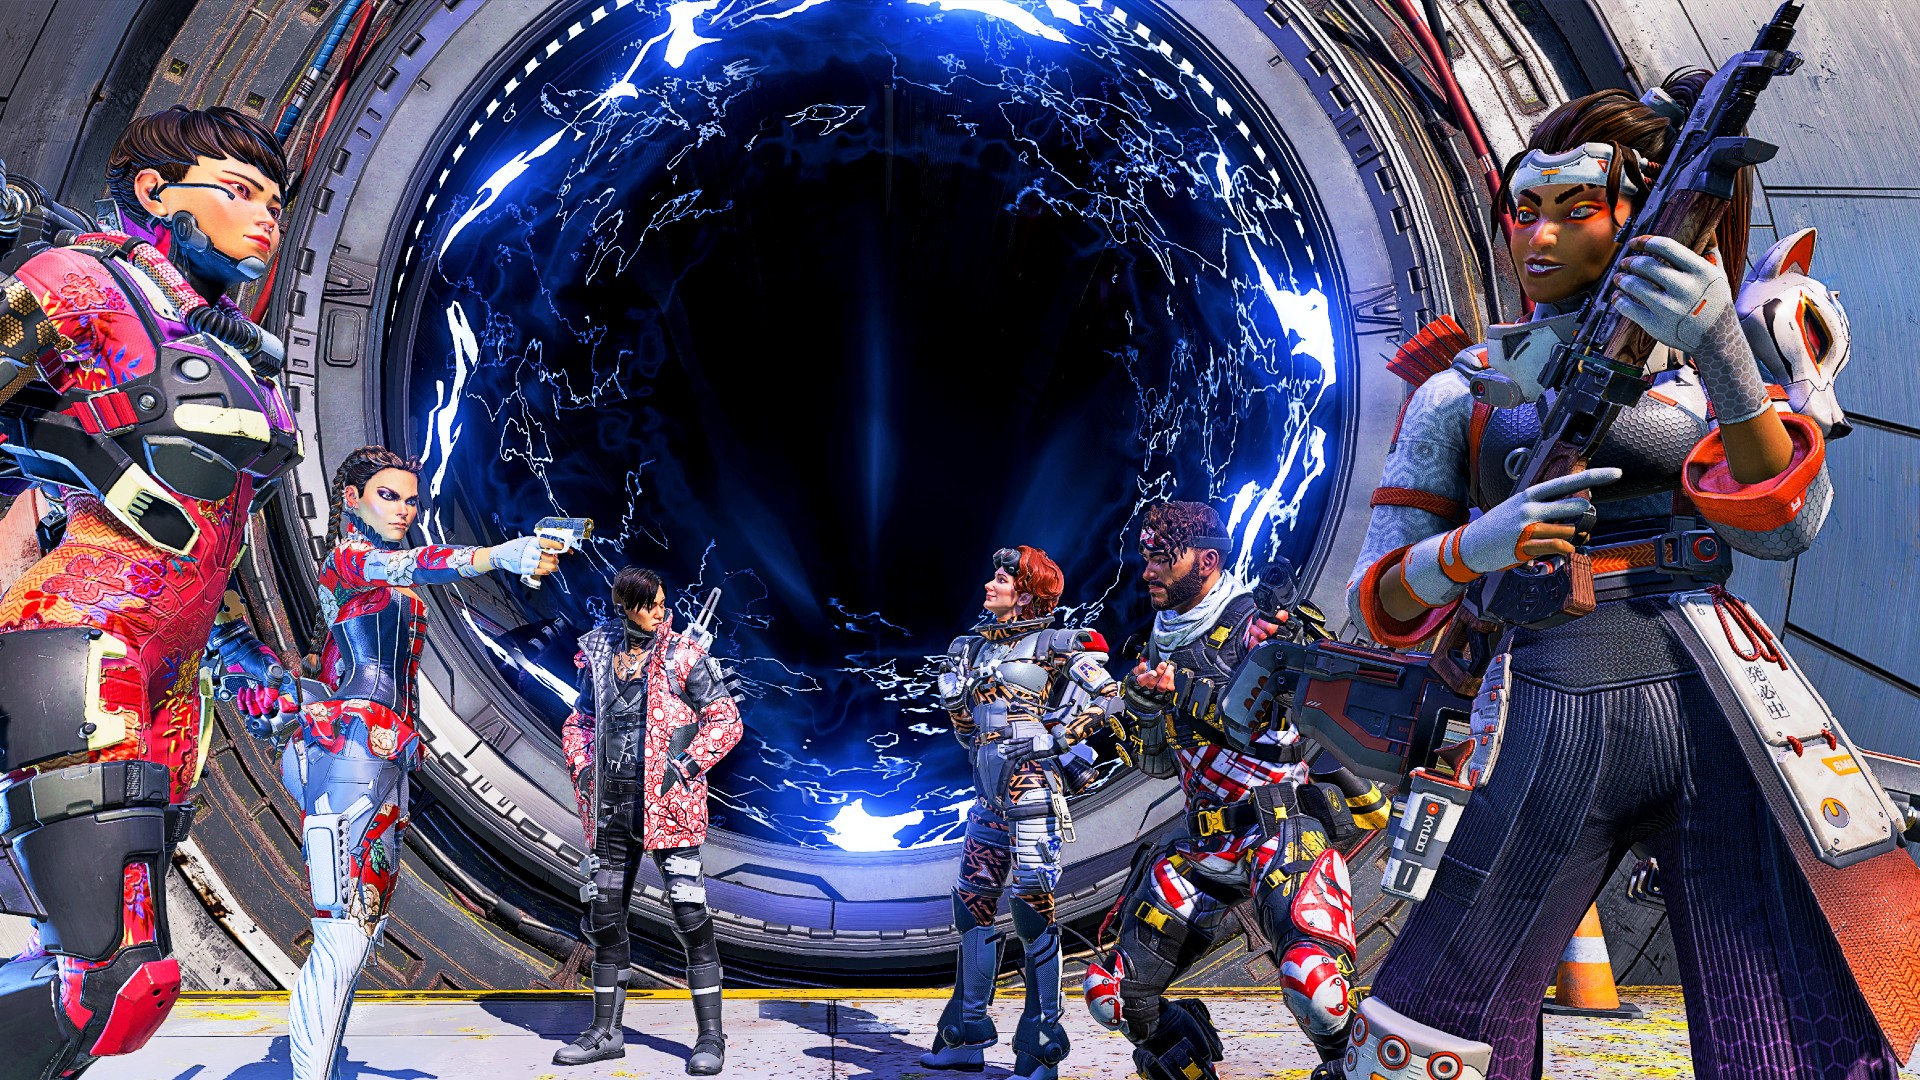 Apex Legends is getting a ranked Arenas mode next season